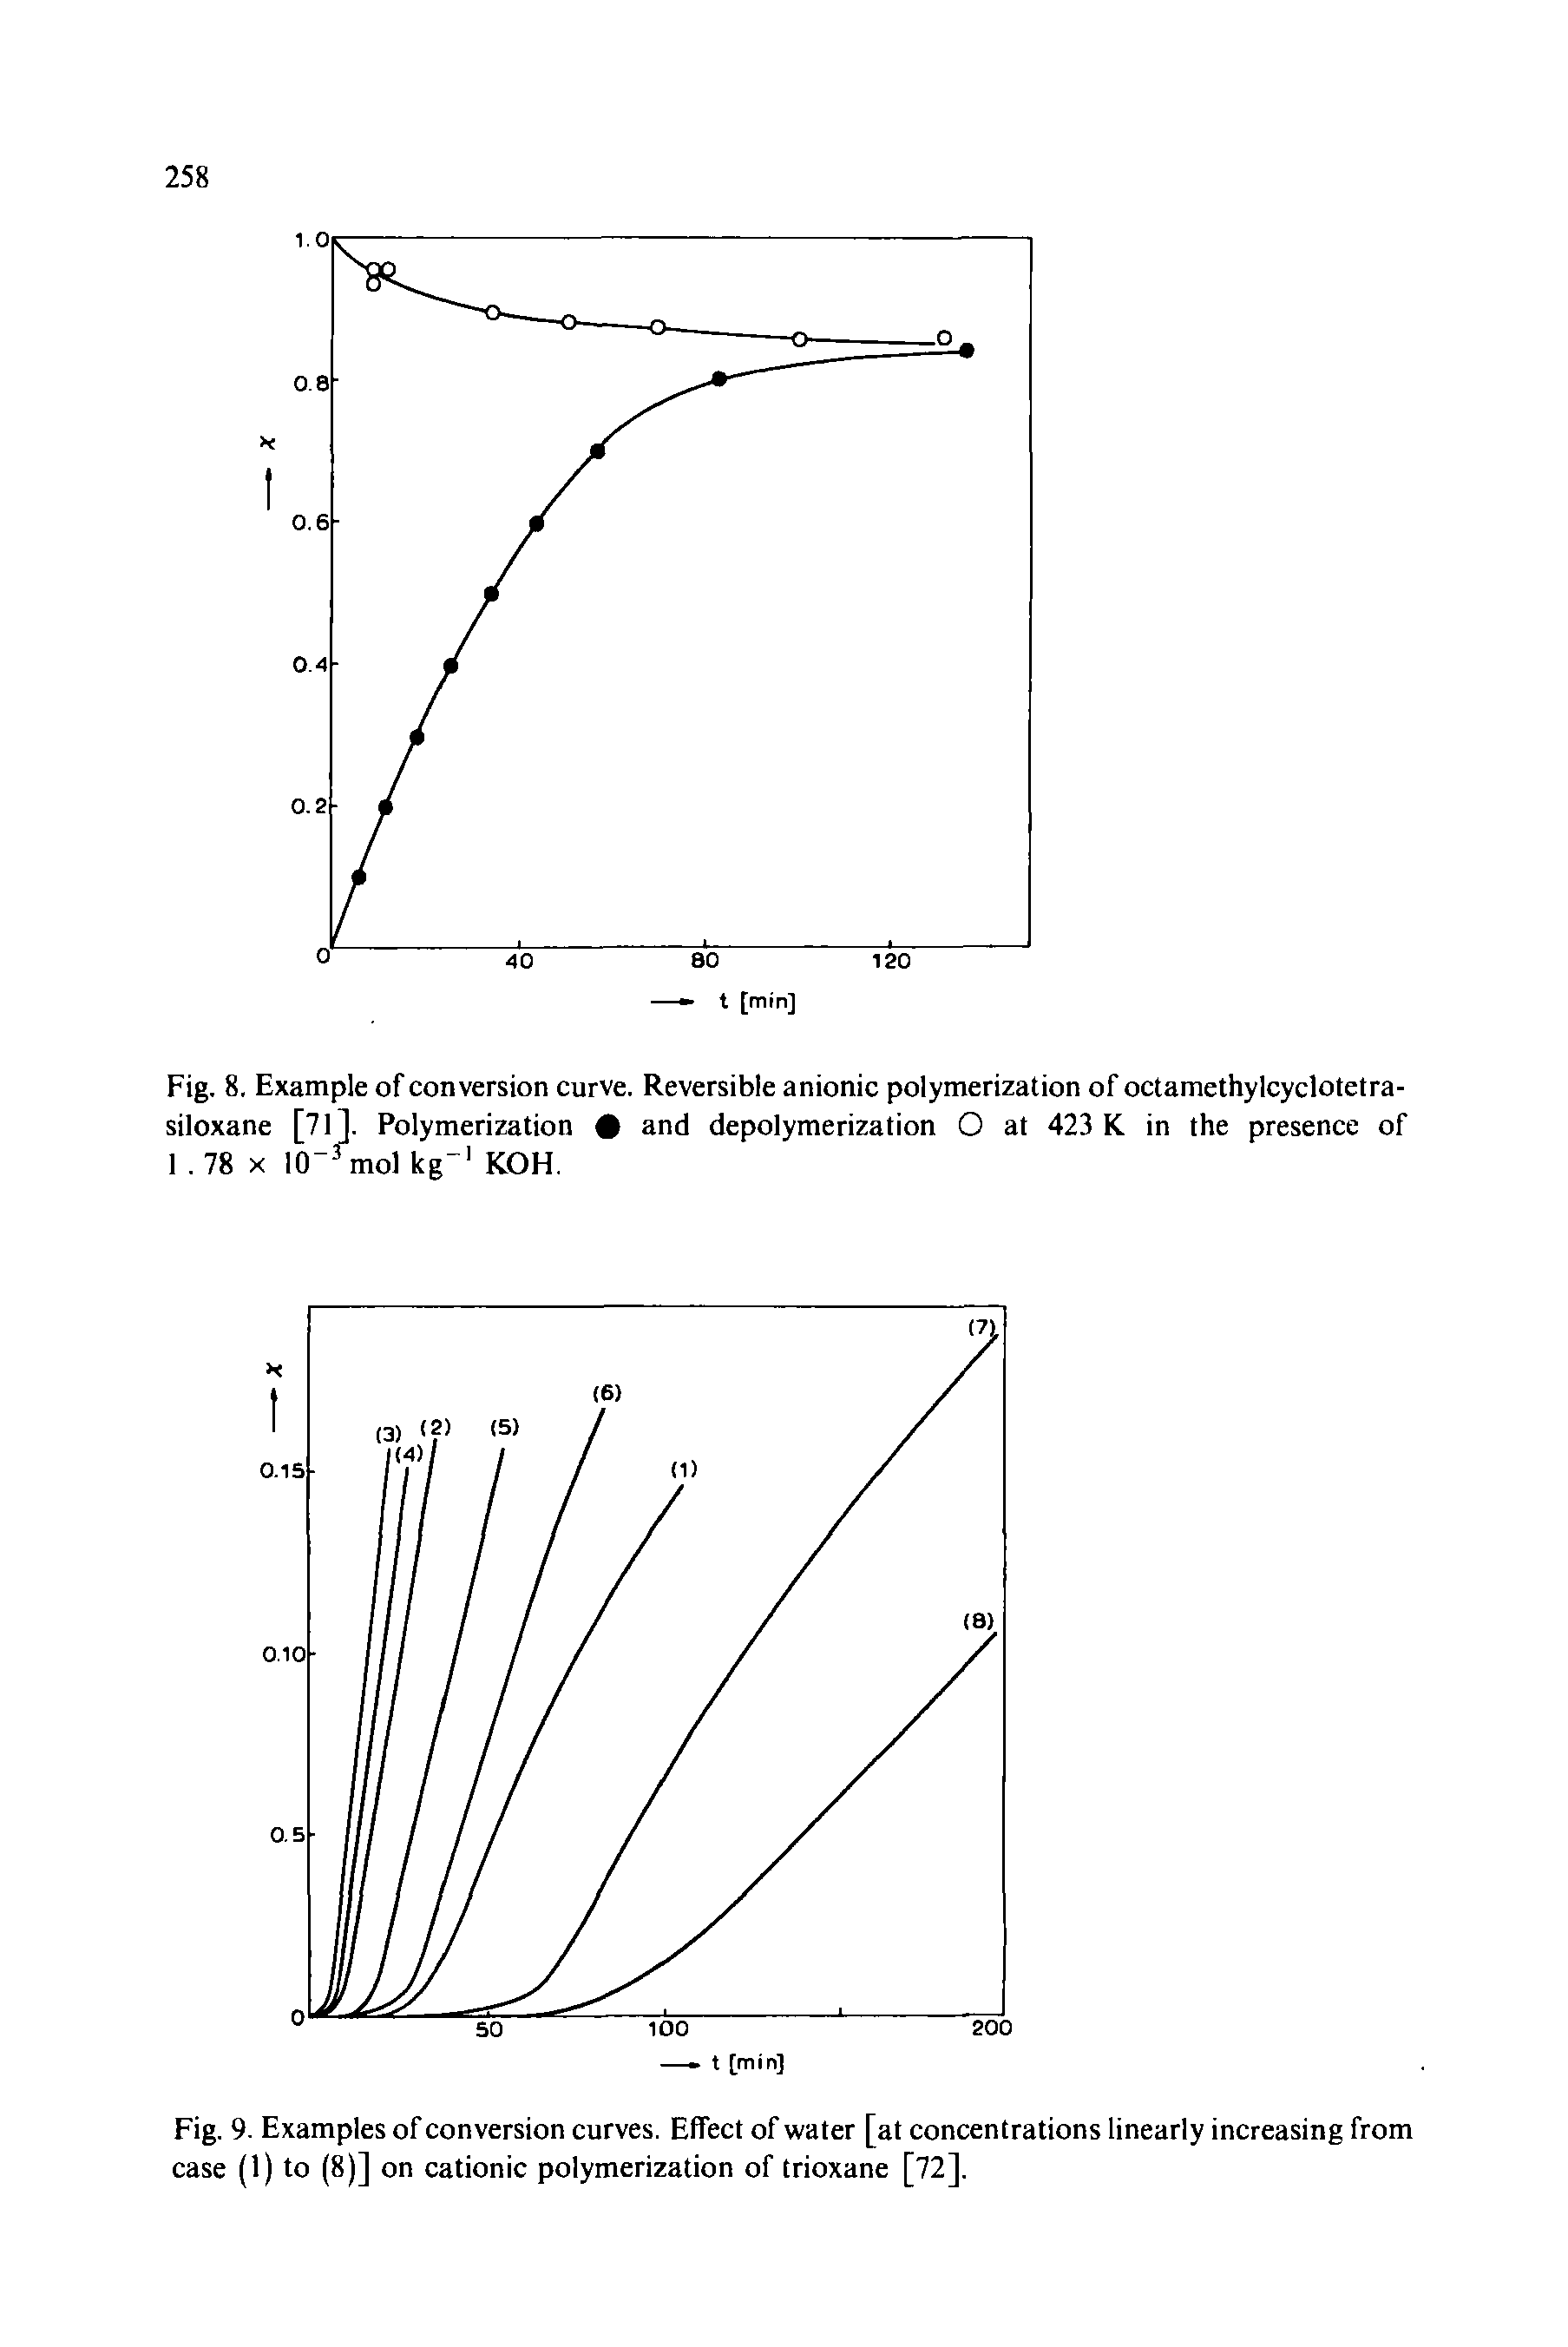 Fig. 9. Examples of conversion curves. Effect of water [at concentrations linearly increasing from case (1) to (8)] on cationic polymerization of trioxane [72],...